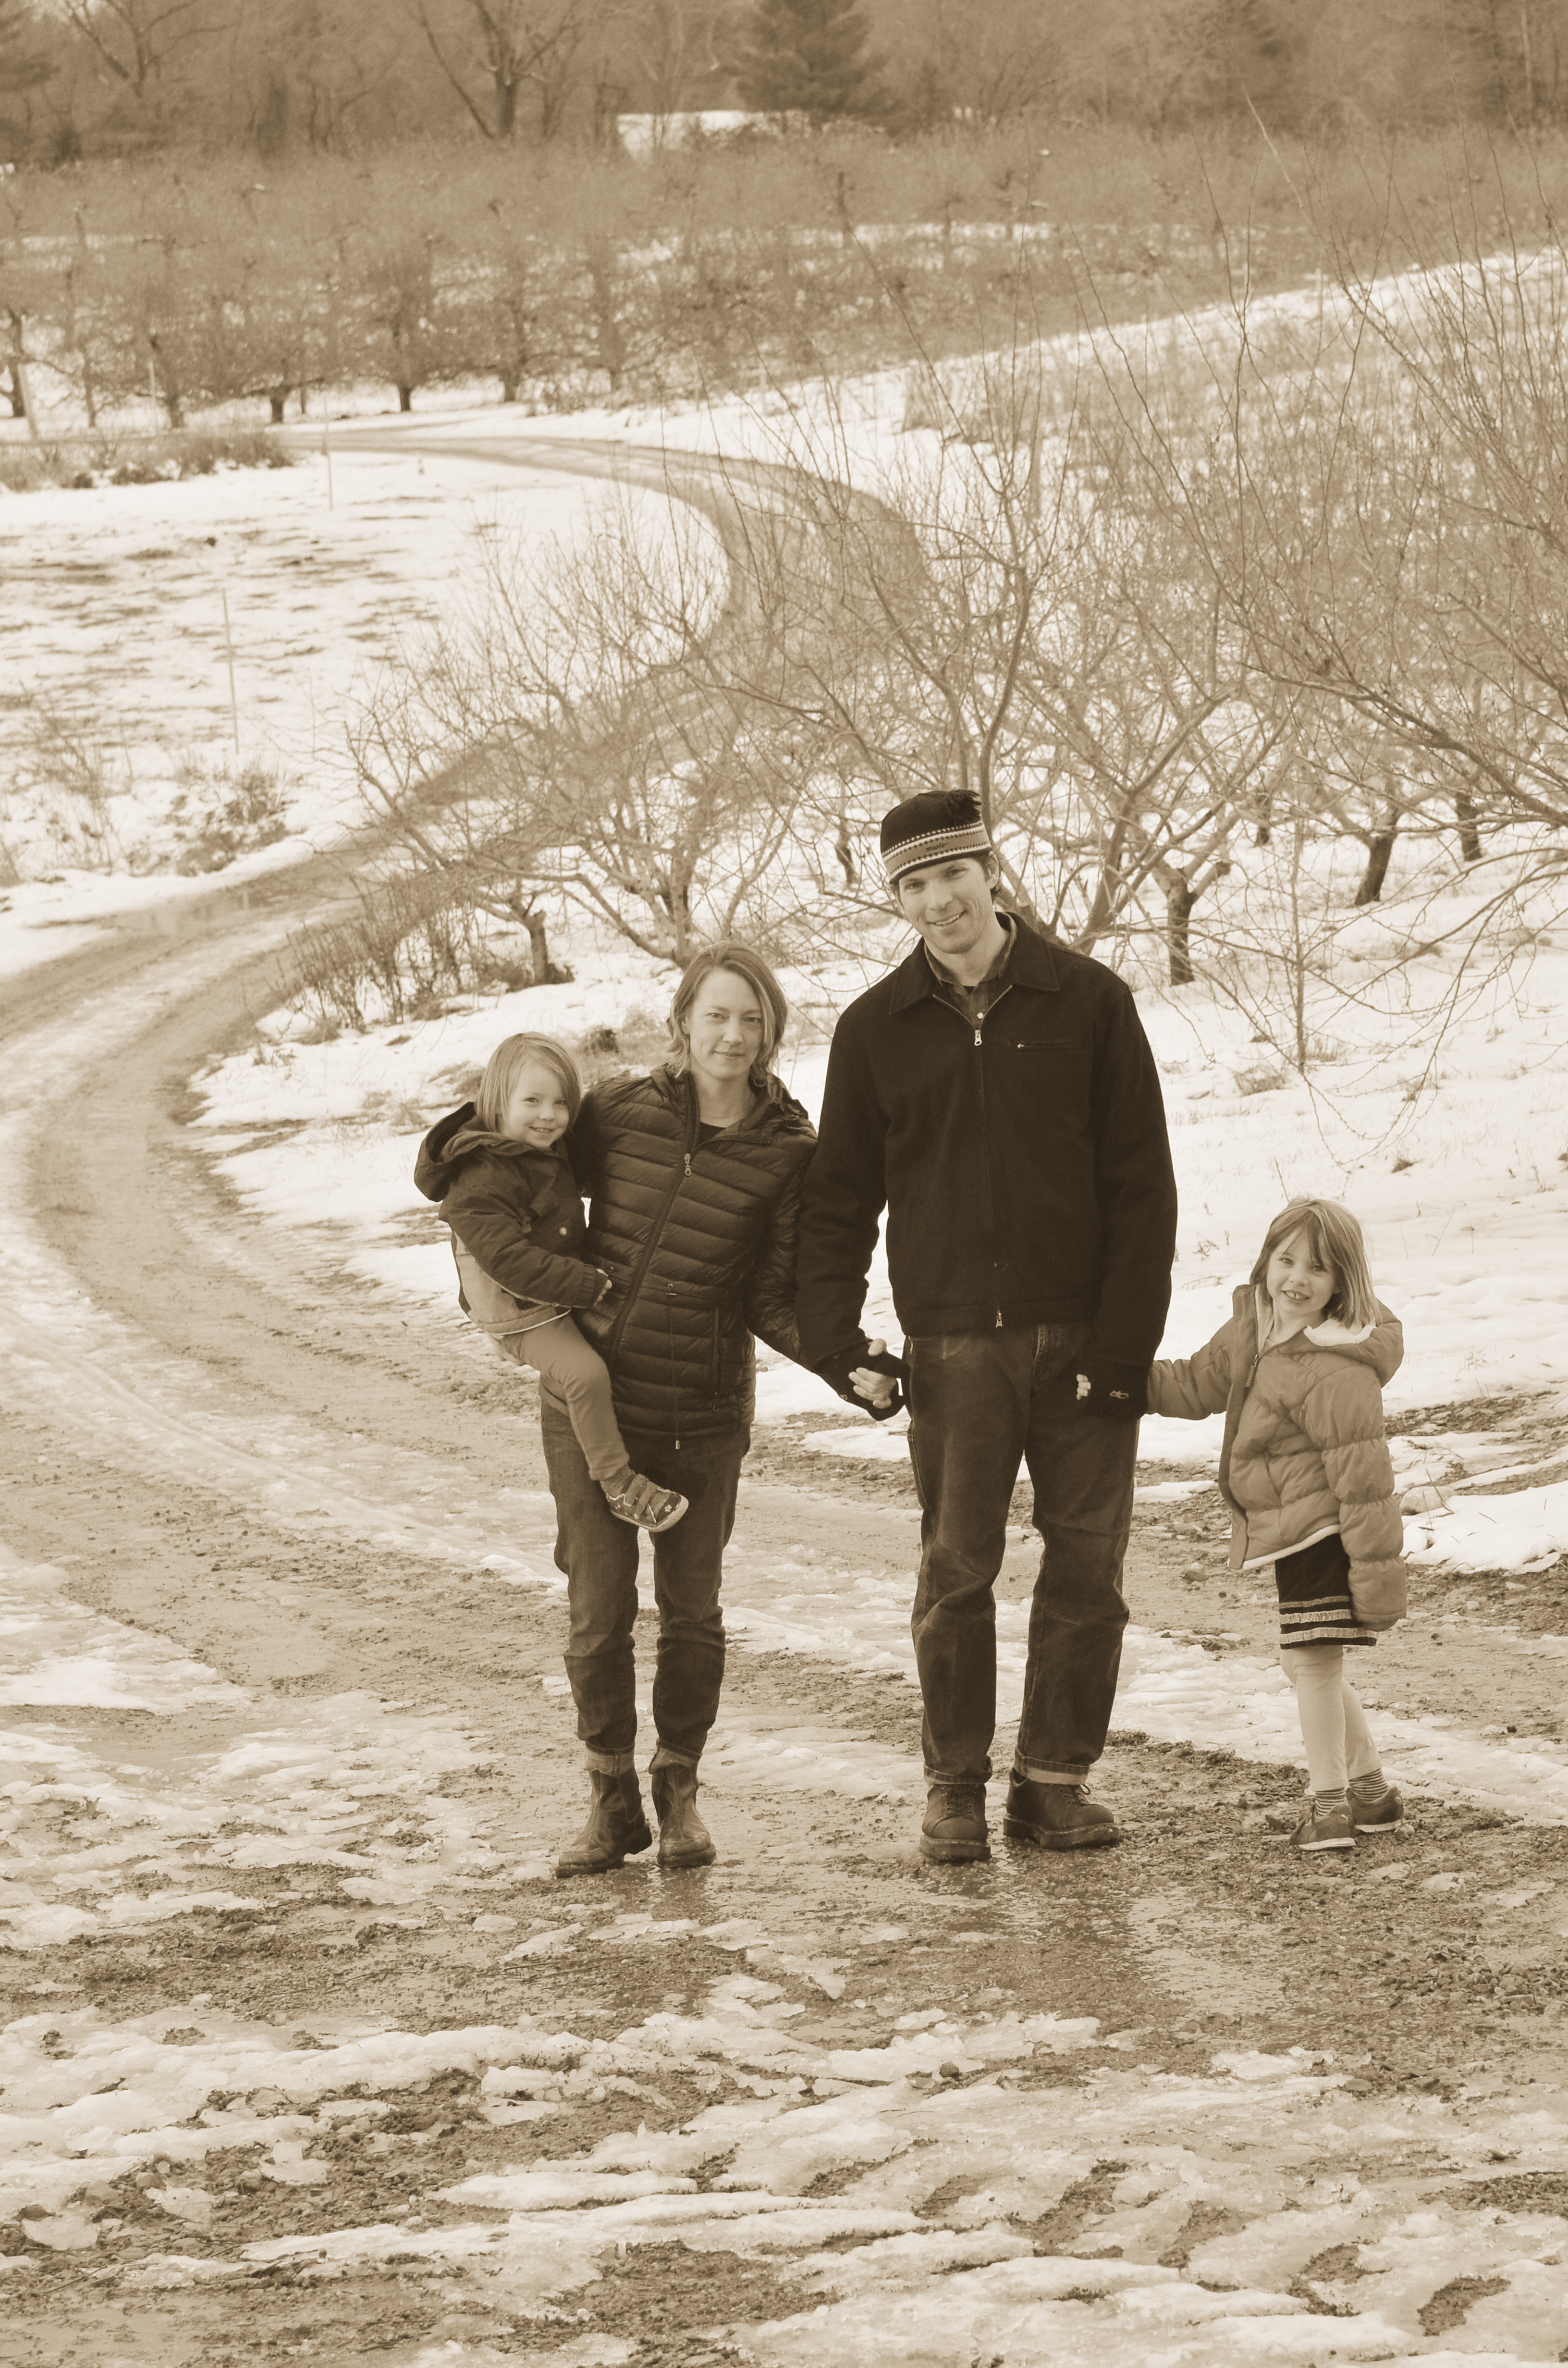 Lifecycle founder, Jason, with his wife and daughter